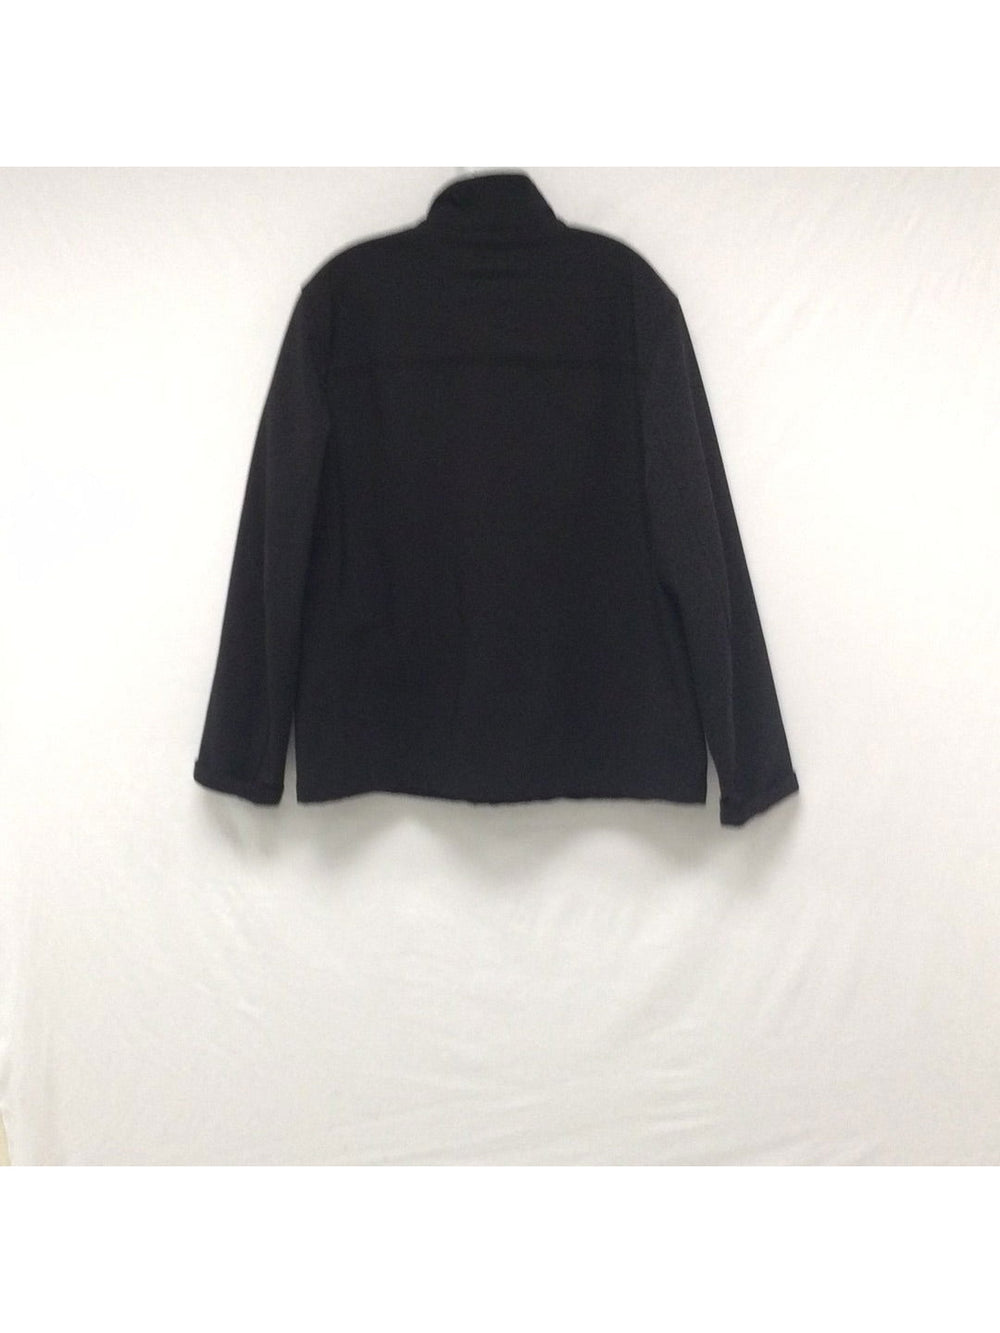 Tommy Hilfiger Men's Large Black Jacket - The Kennedy Collective Thrift - 